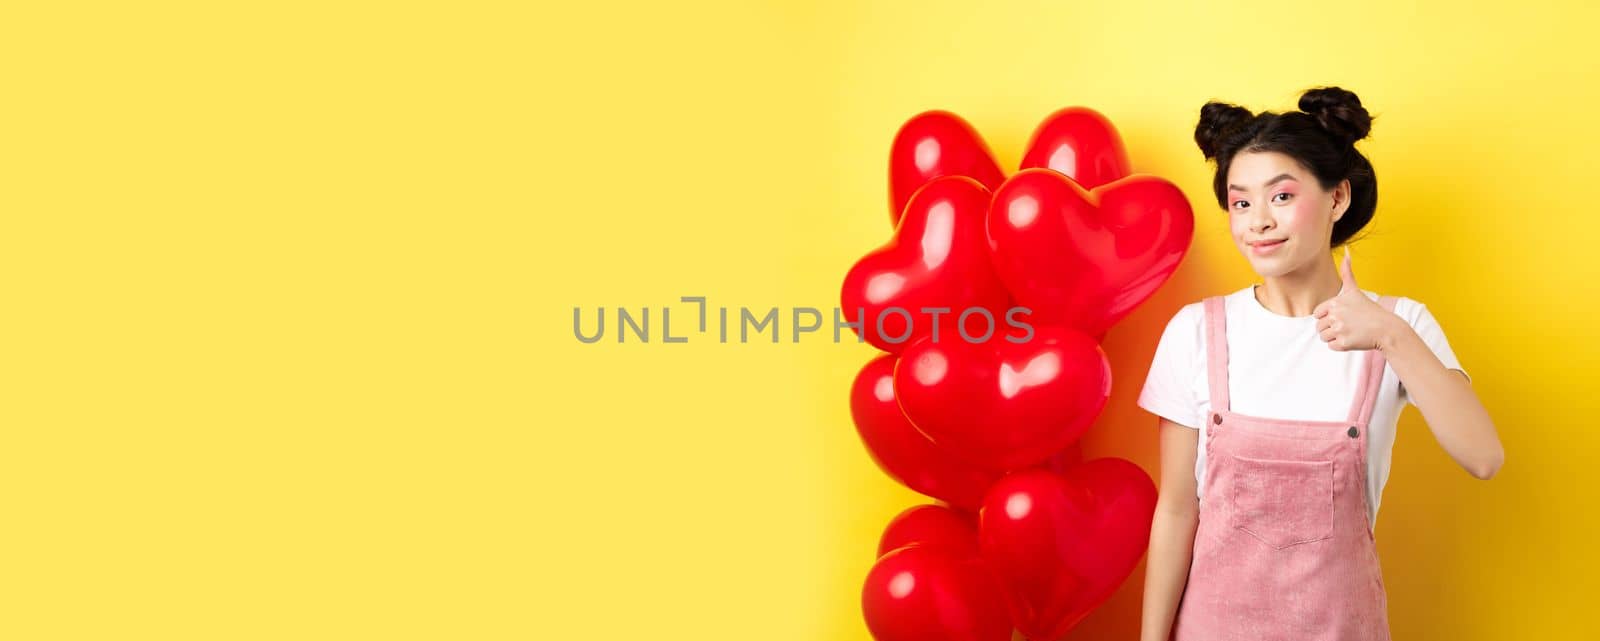 Fashionble asian woman in romantic outfit with make-up, showing thumb up and smiling, praising Valentines day offer, standing near red heart balloons, yellow background.